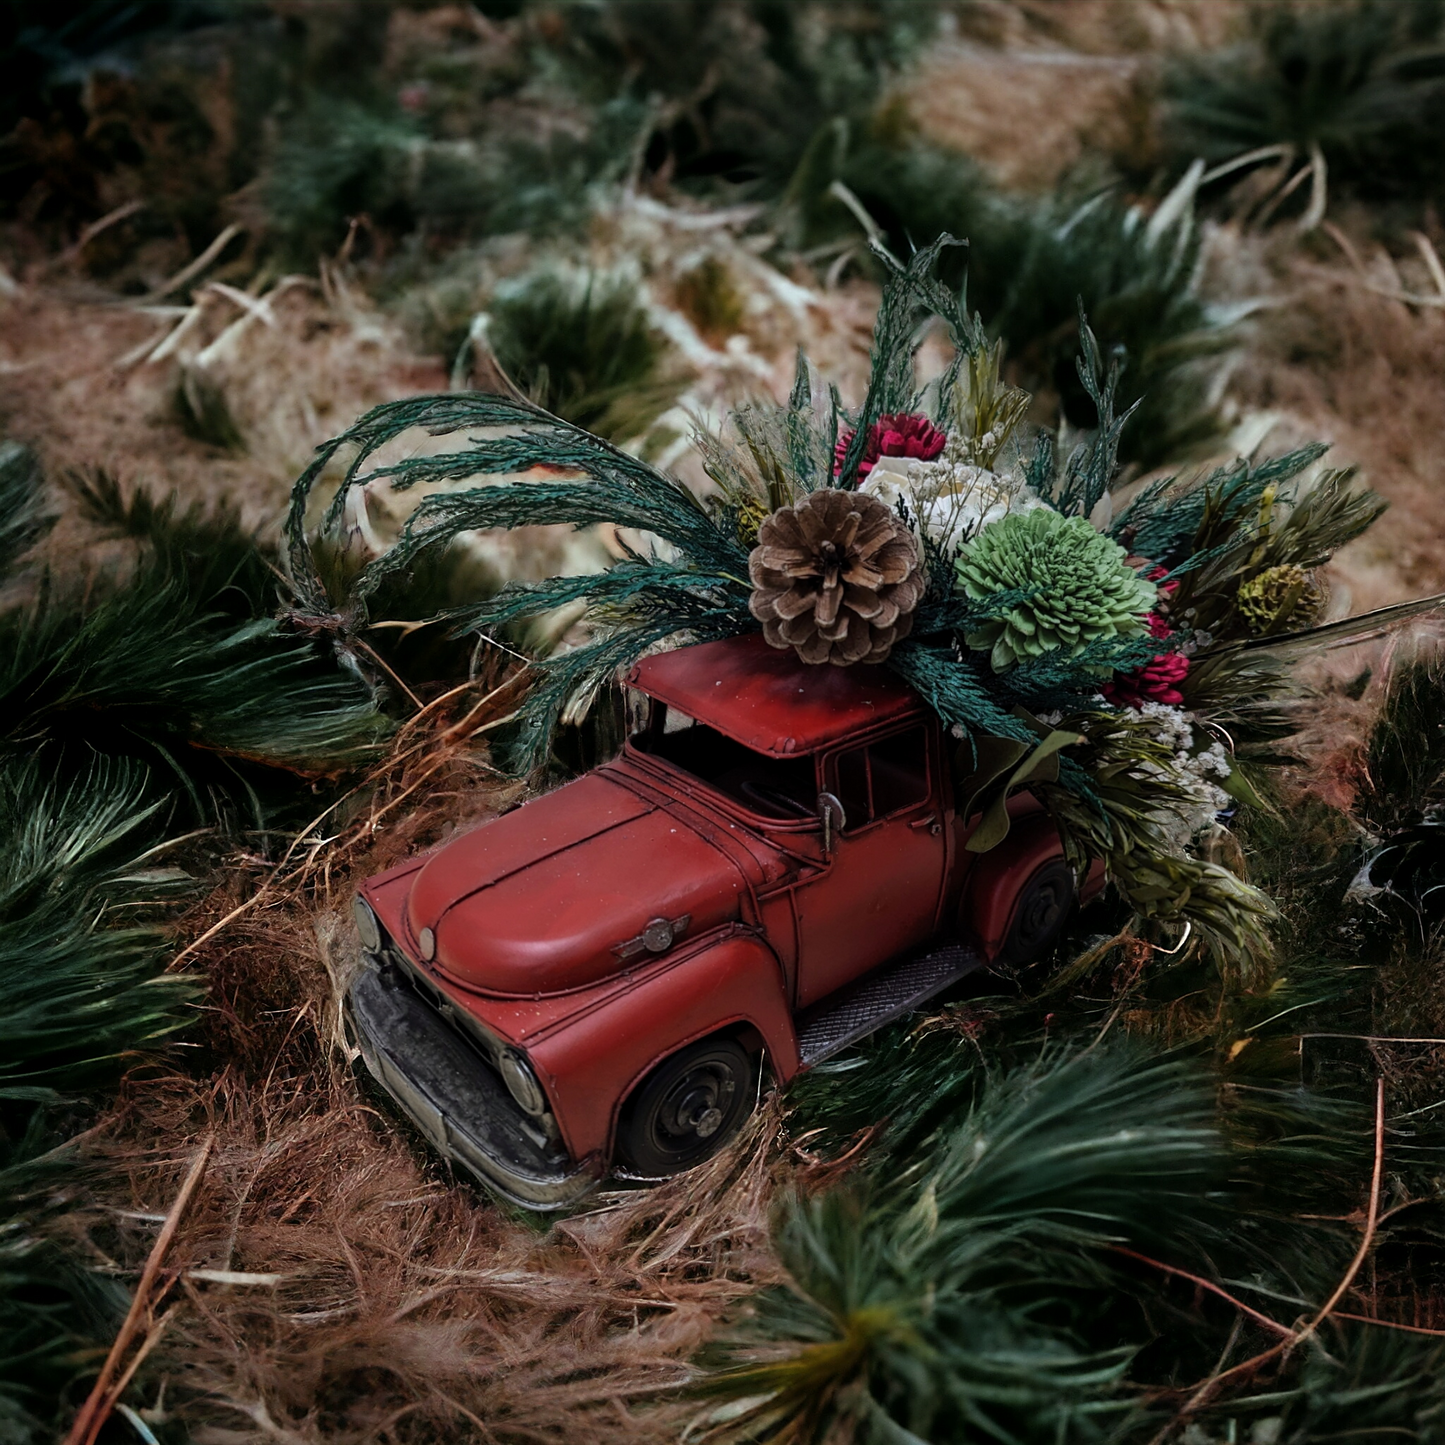 The Christmas Truck That Could!